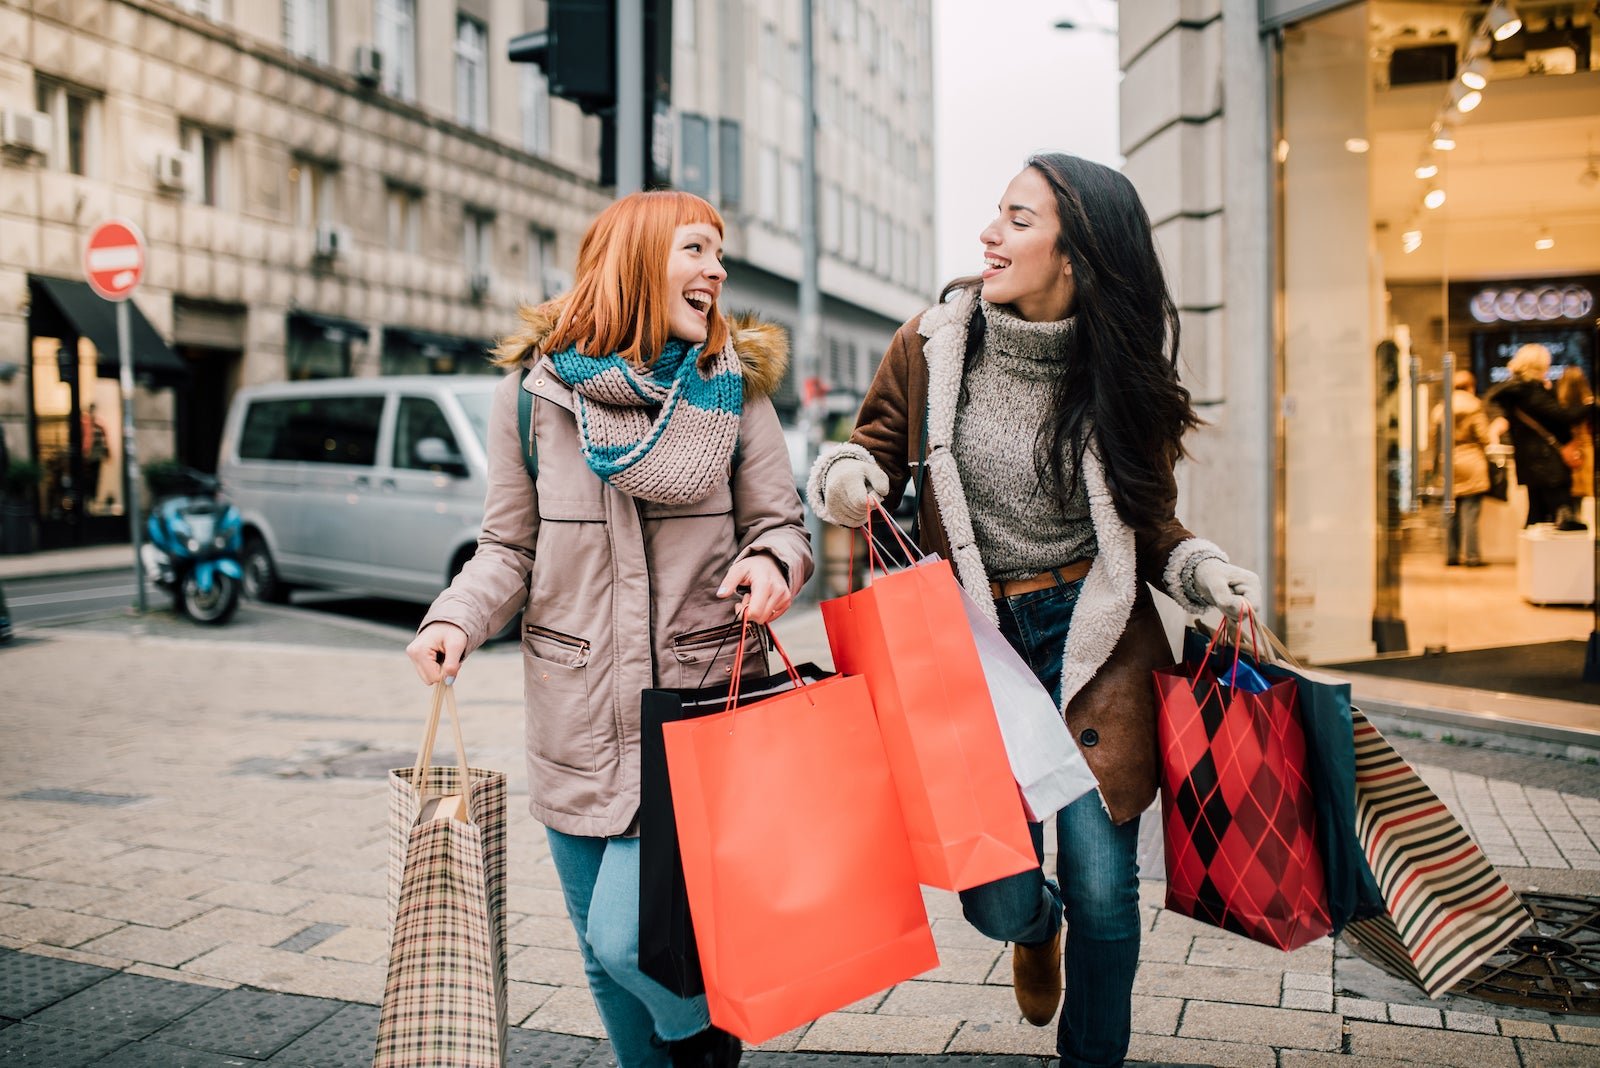 From shopping portals to cash back: Your complete guide to maximizing Black Friday purchases